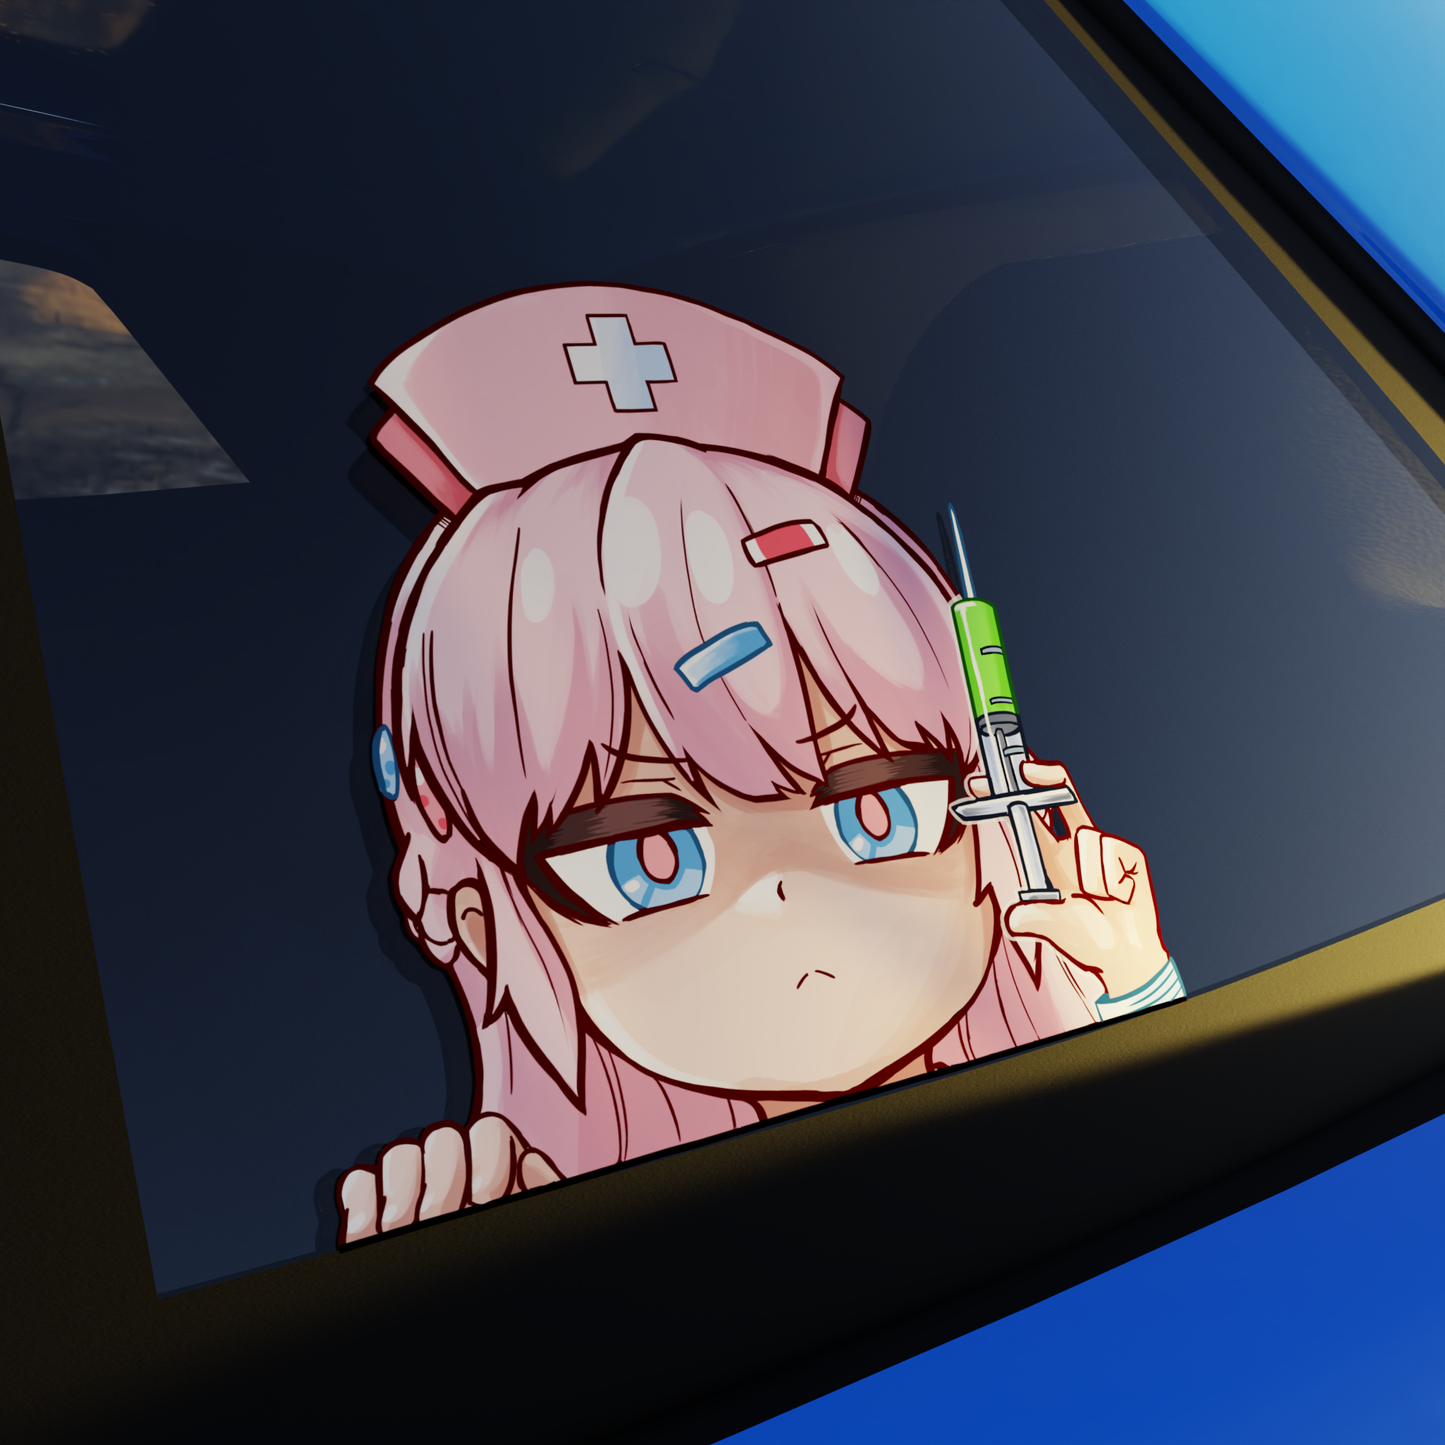 Clinic of Horrors : Bianca Car Decals